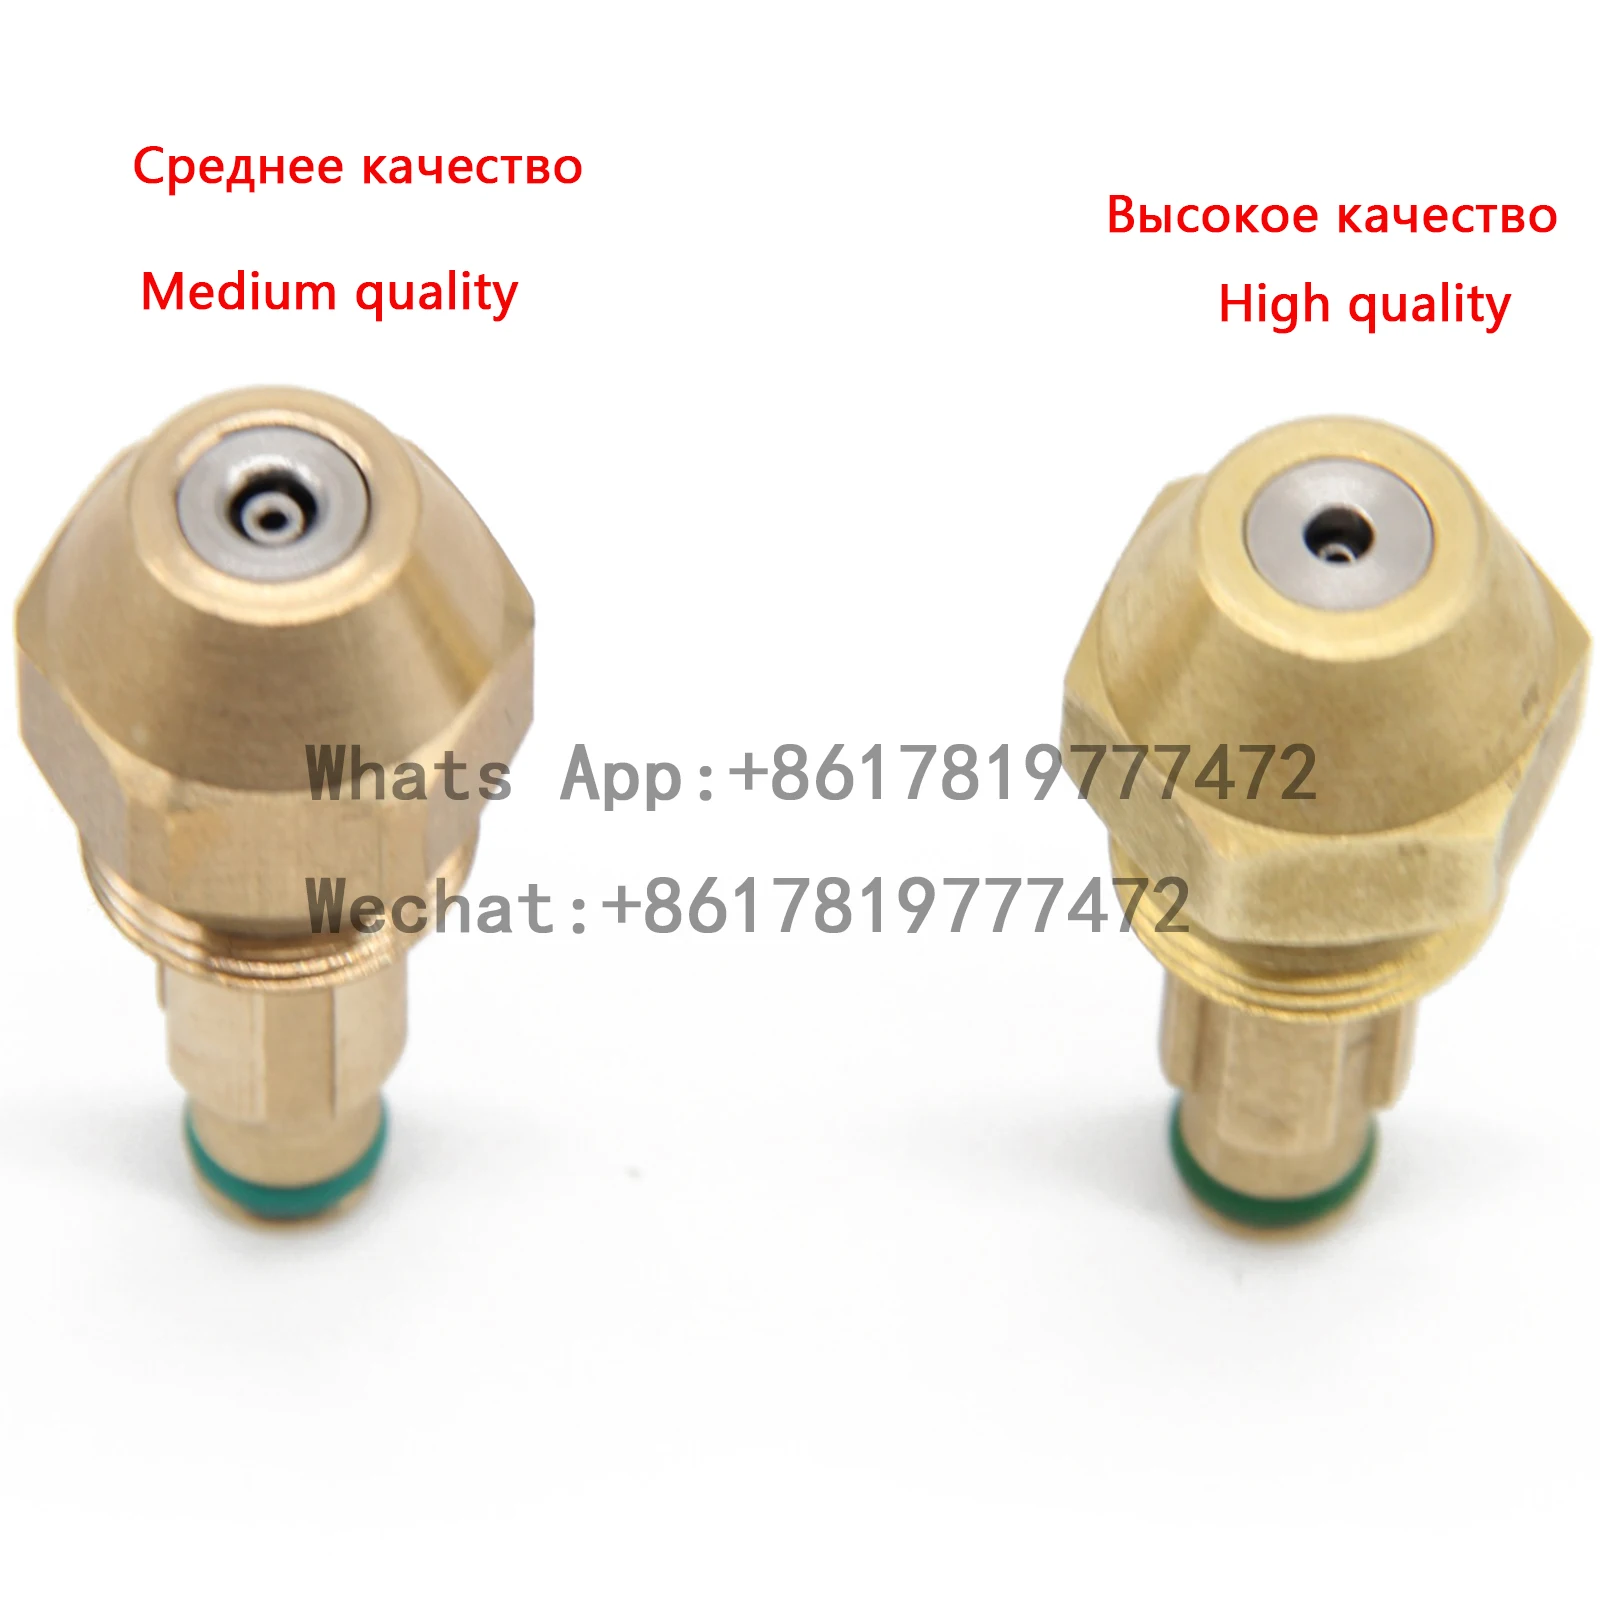 

High Quality Siphon Cone Spray Jet Diesel Heavy Oil Injection Air Atomizing Nozzle Waste Oil Burner Nozzle Boiler Combustion